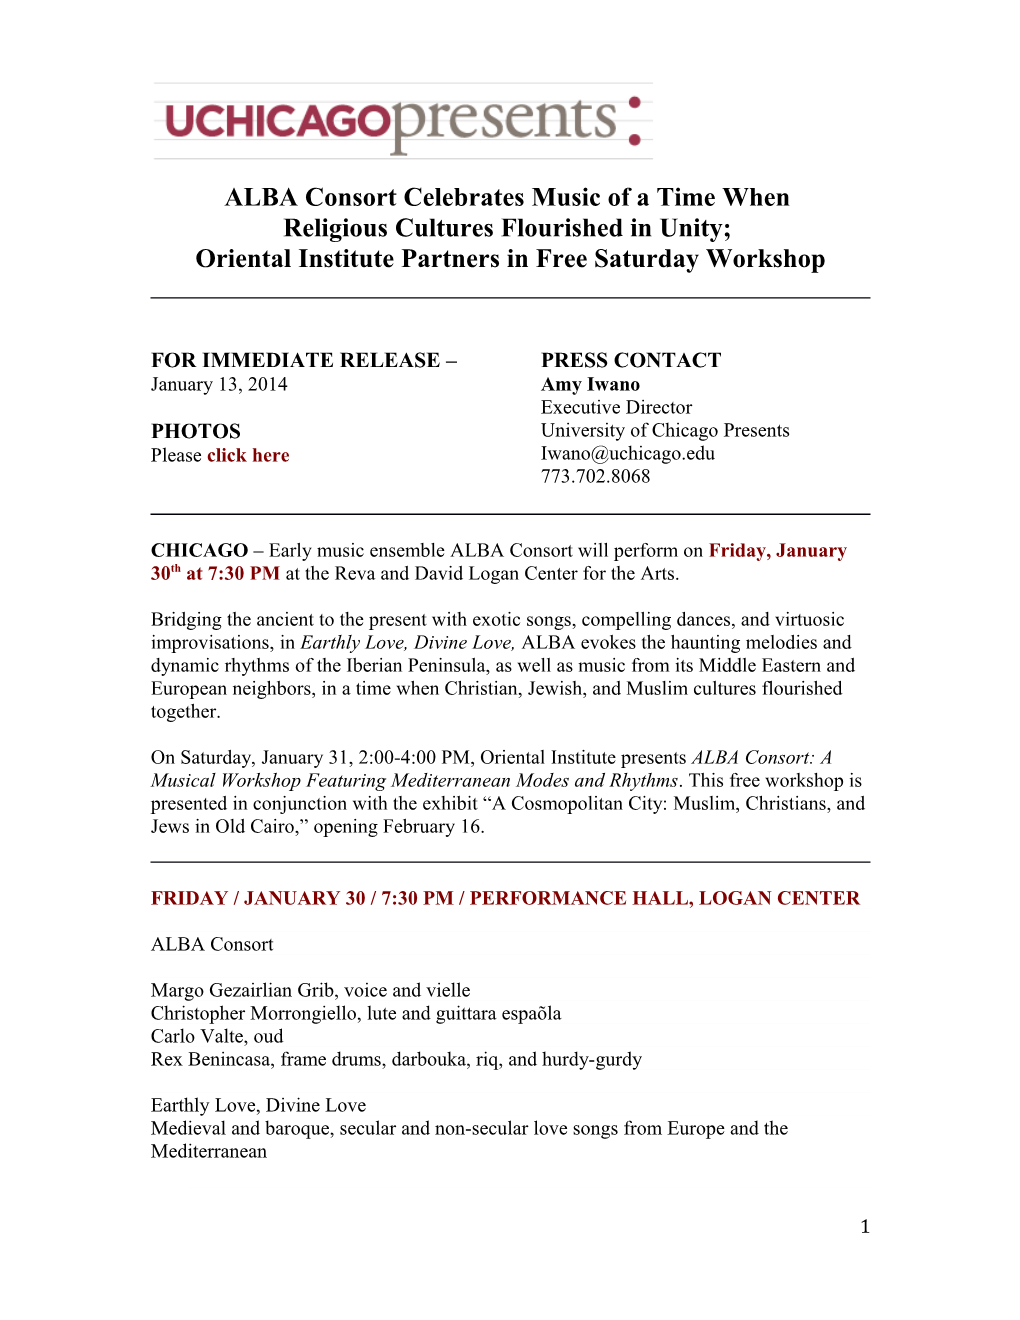 ALBA Consort Celebrates Music of a Time When